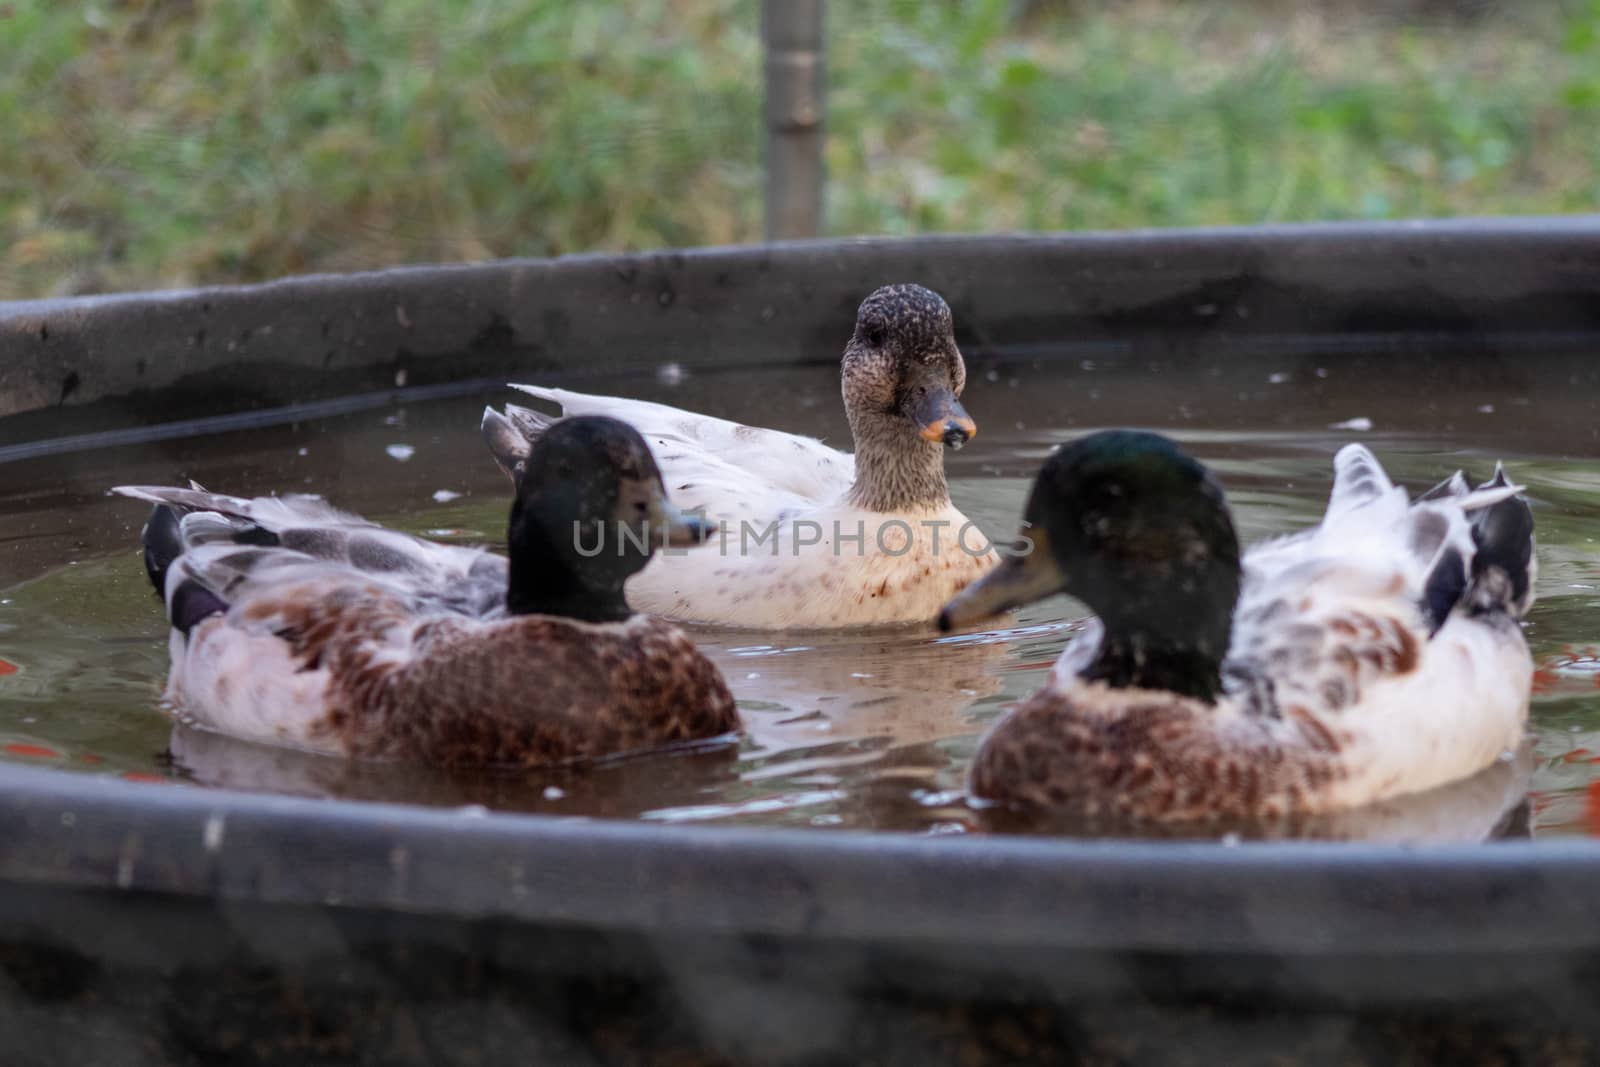 Snowy Call Ducks swimming in there little pool . High quality photo